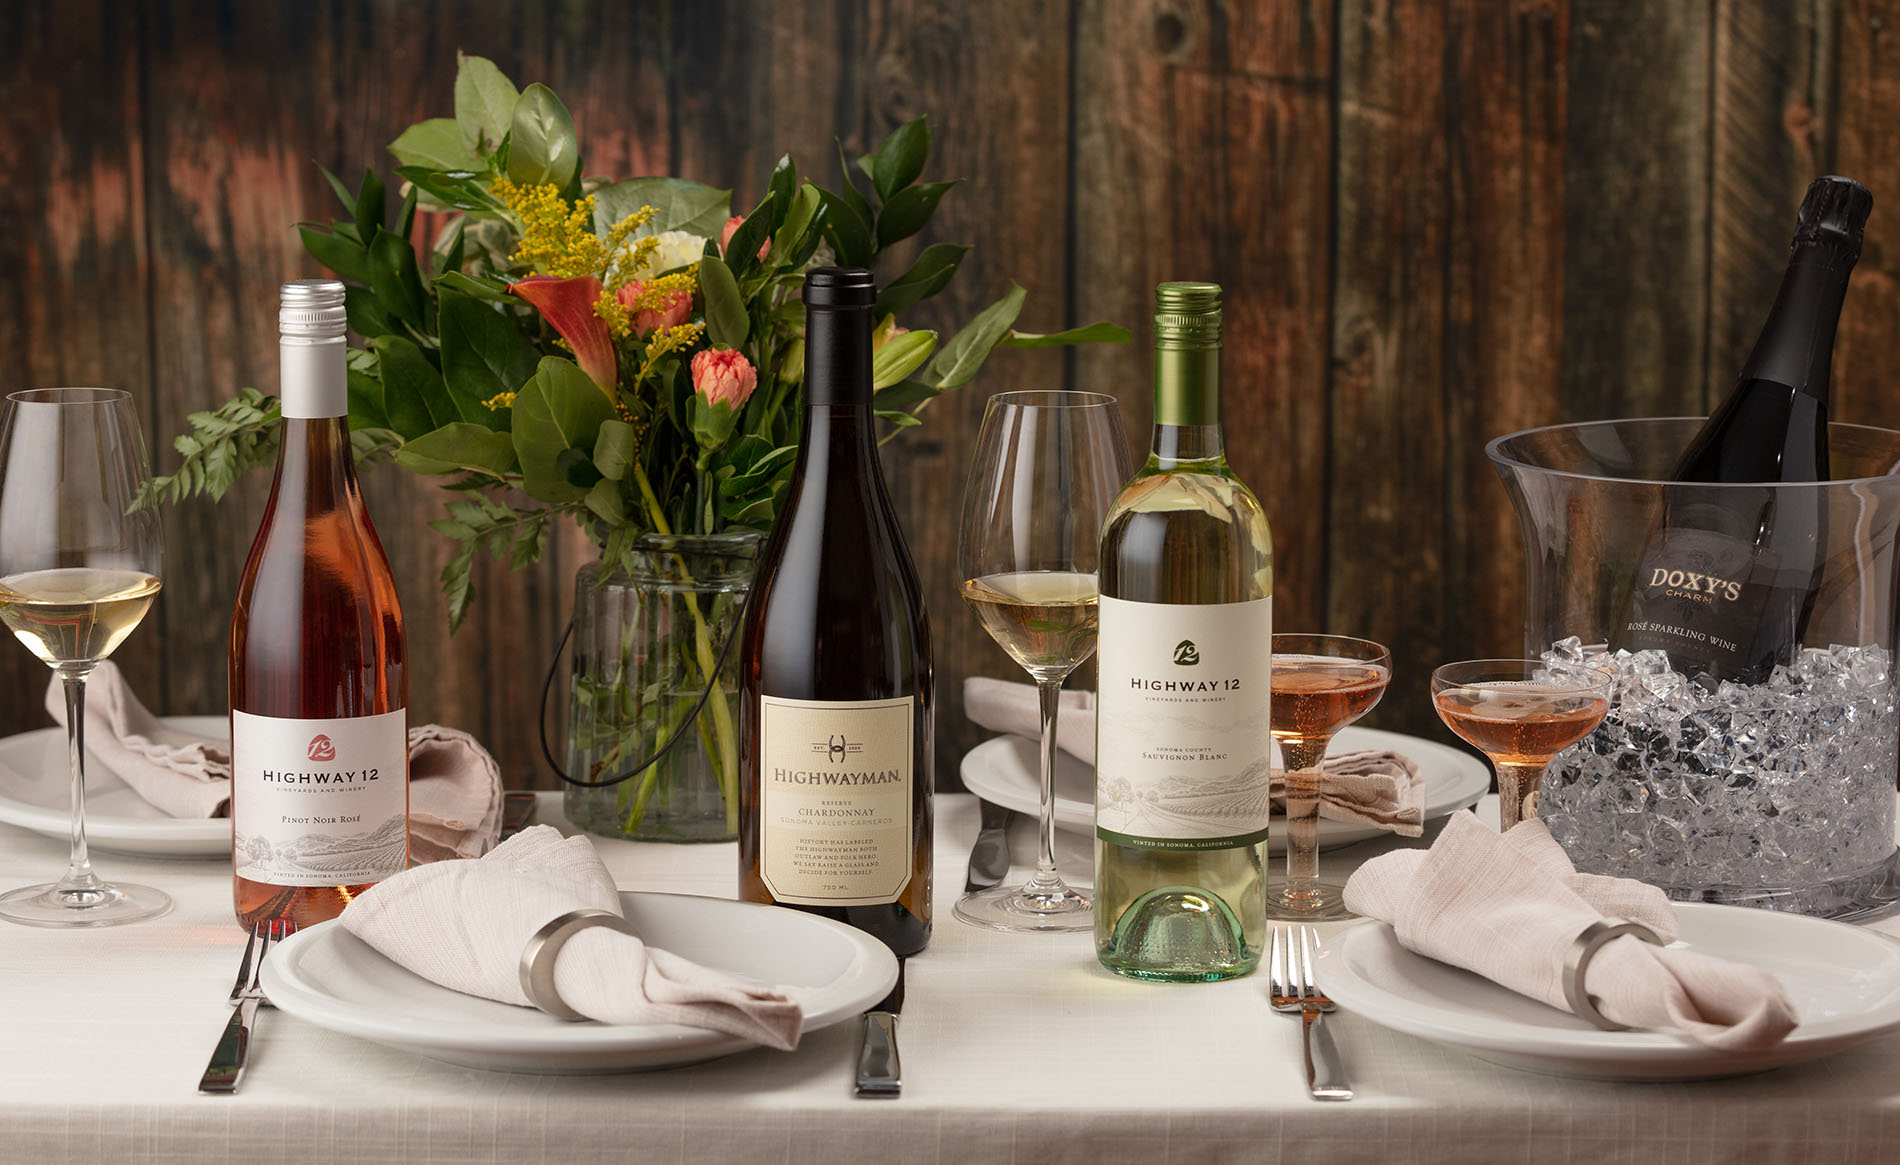 Spring themed table setting photo with Highway 12 Rose, Sauvignon Blanc and Highwayman Chardonnay